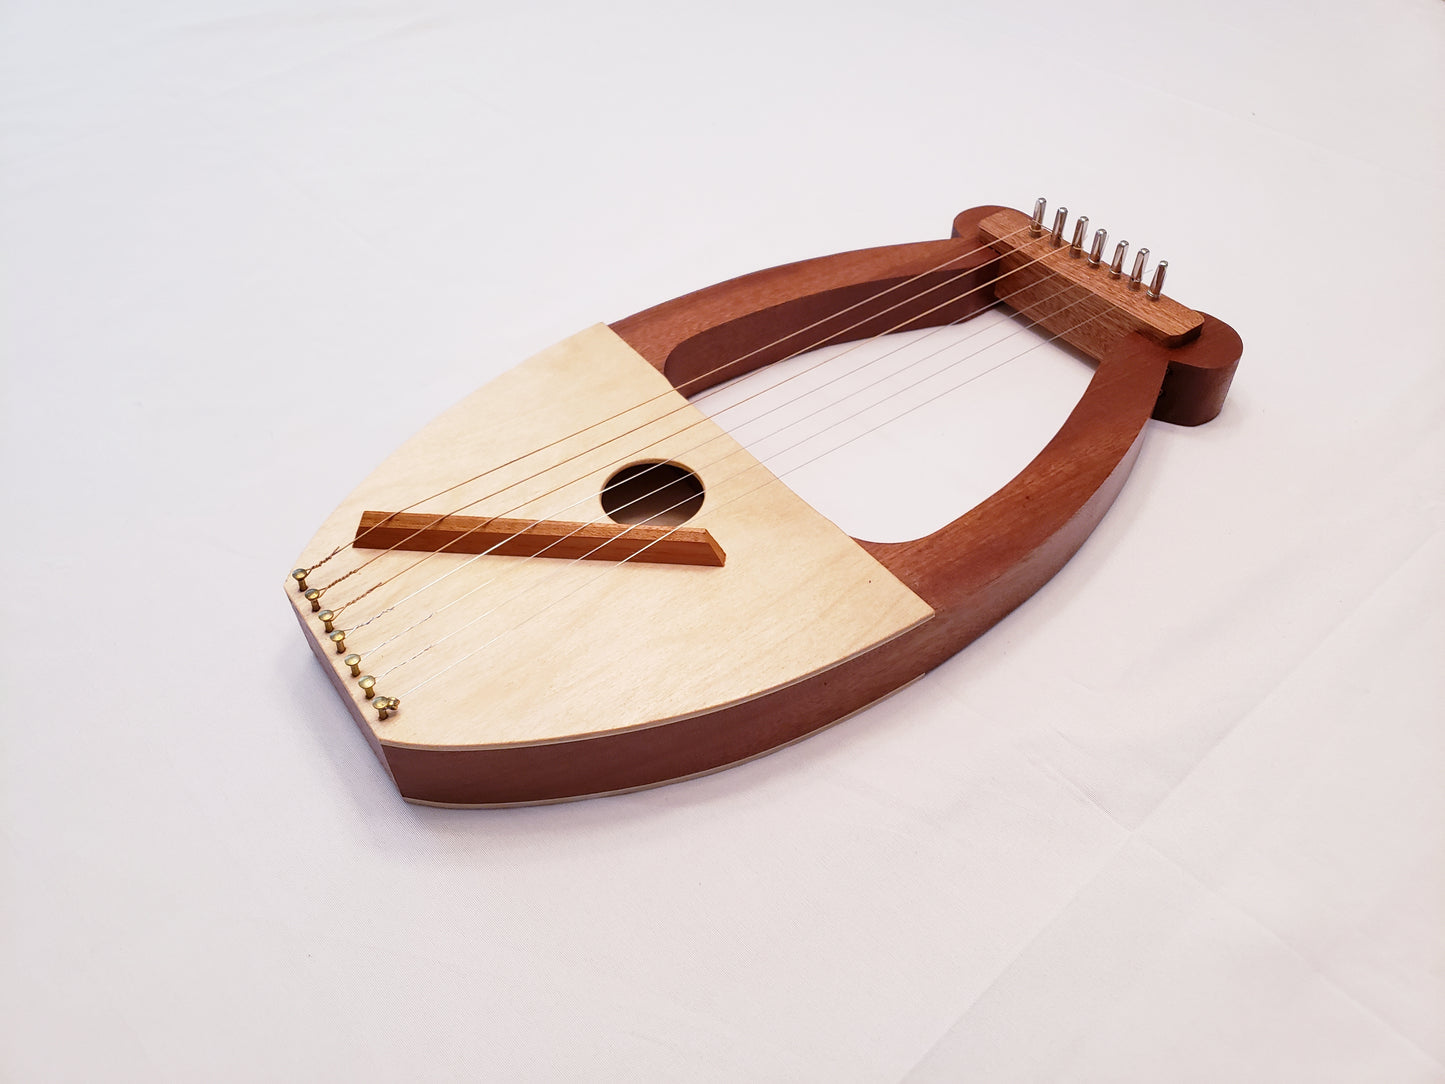 lyre with 7 strings: front view